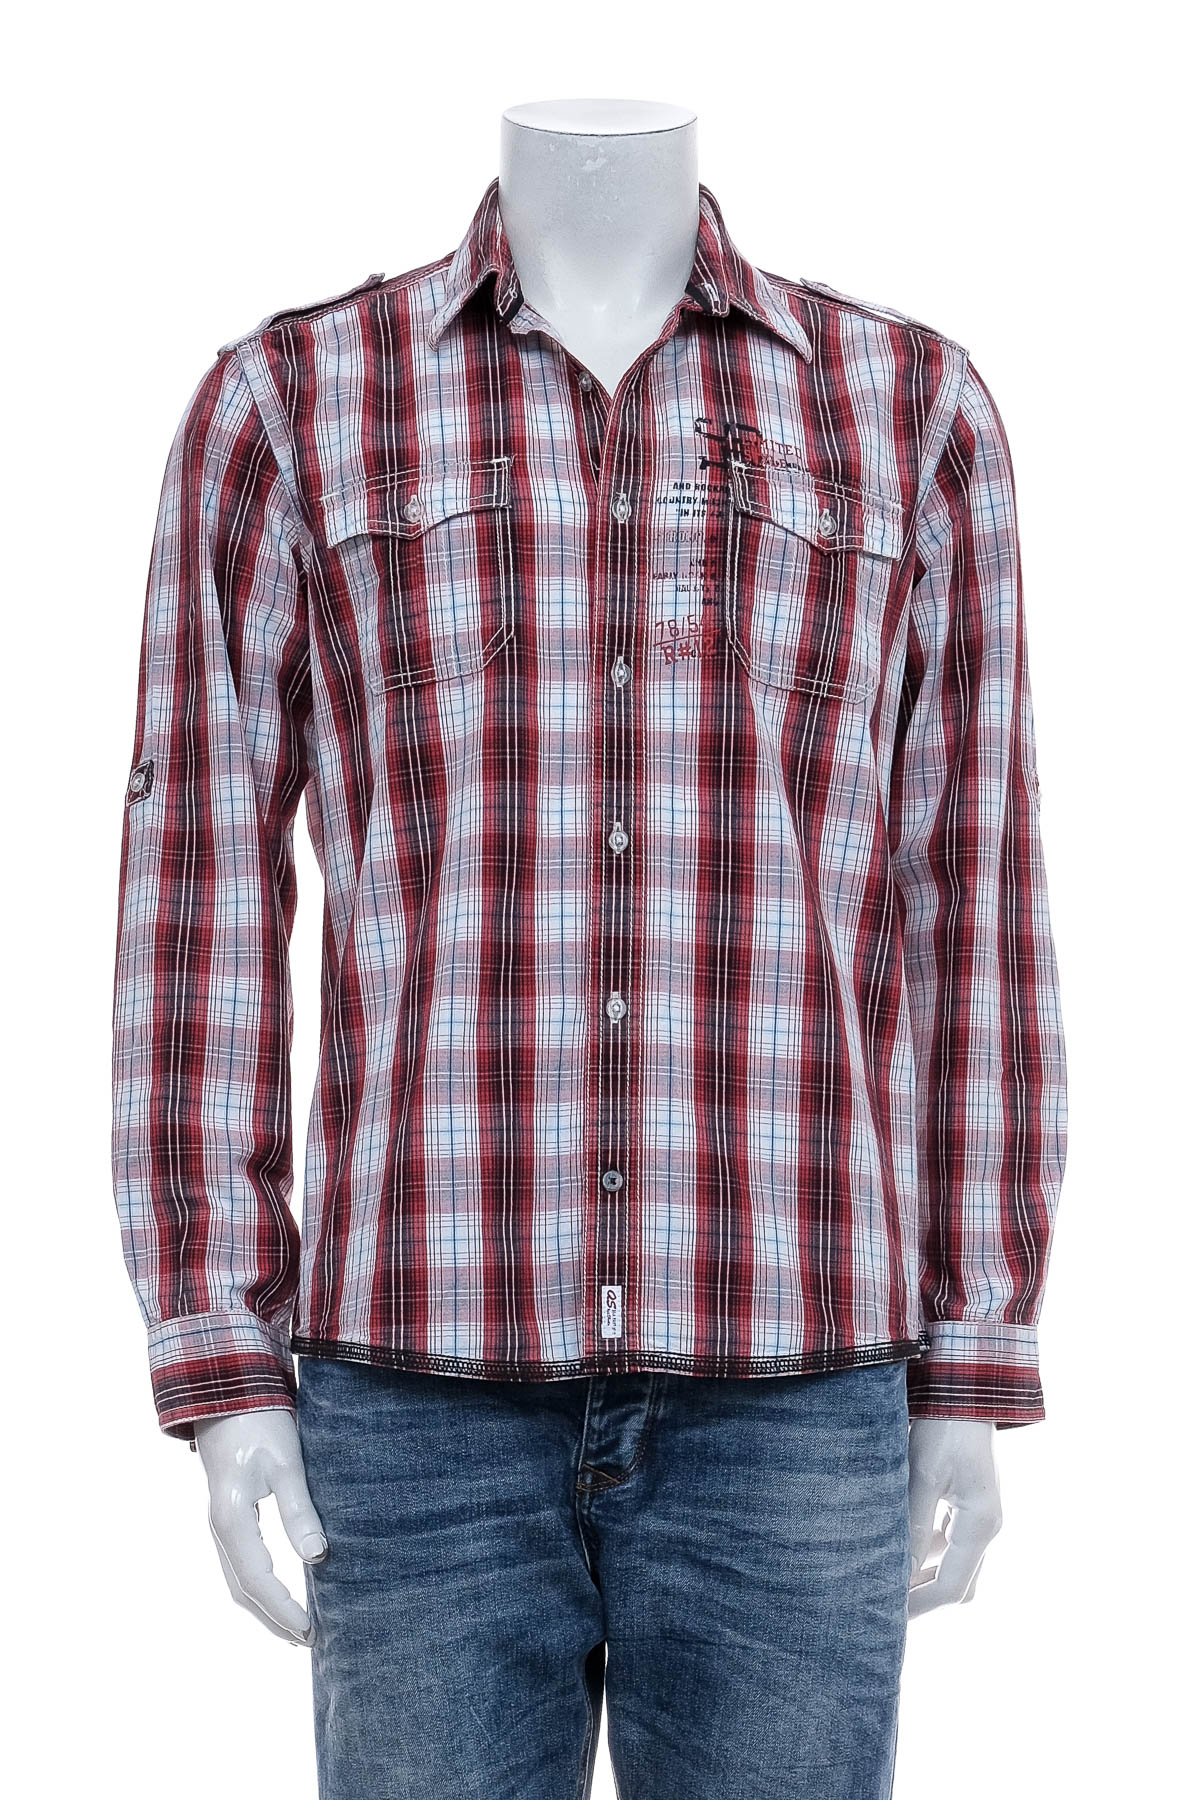 Men's shirt - QS by S.Oliver - 0